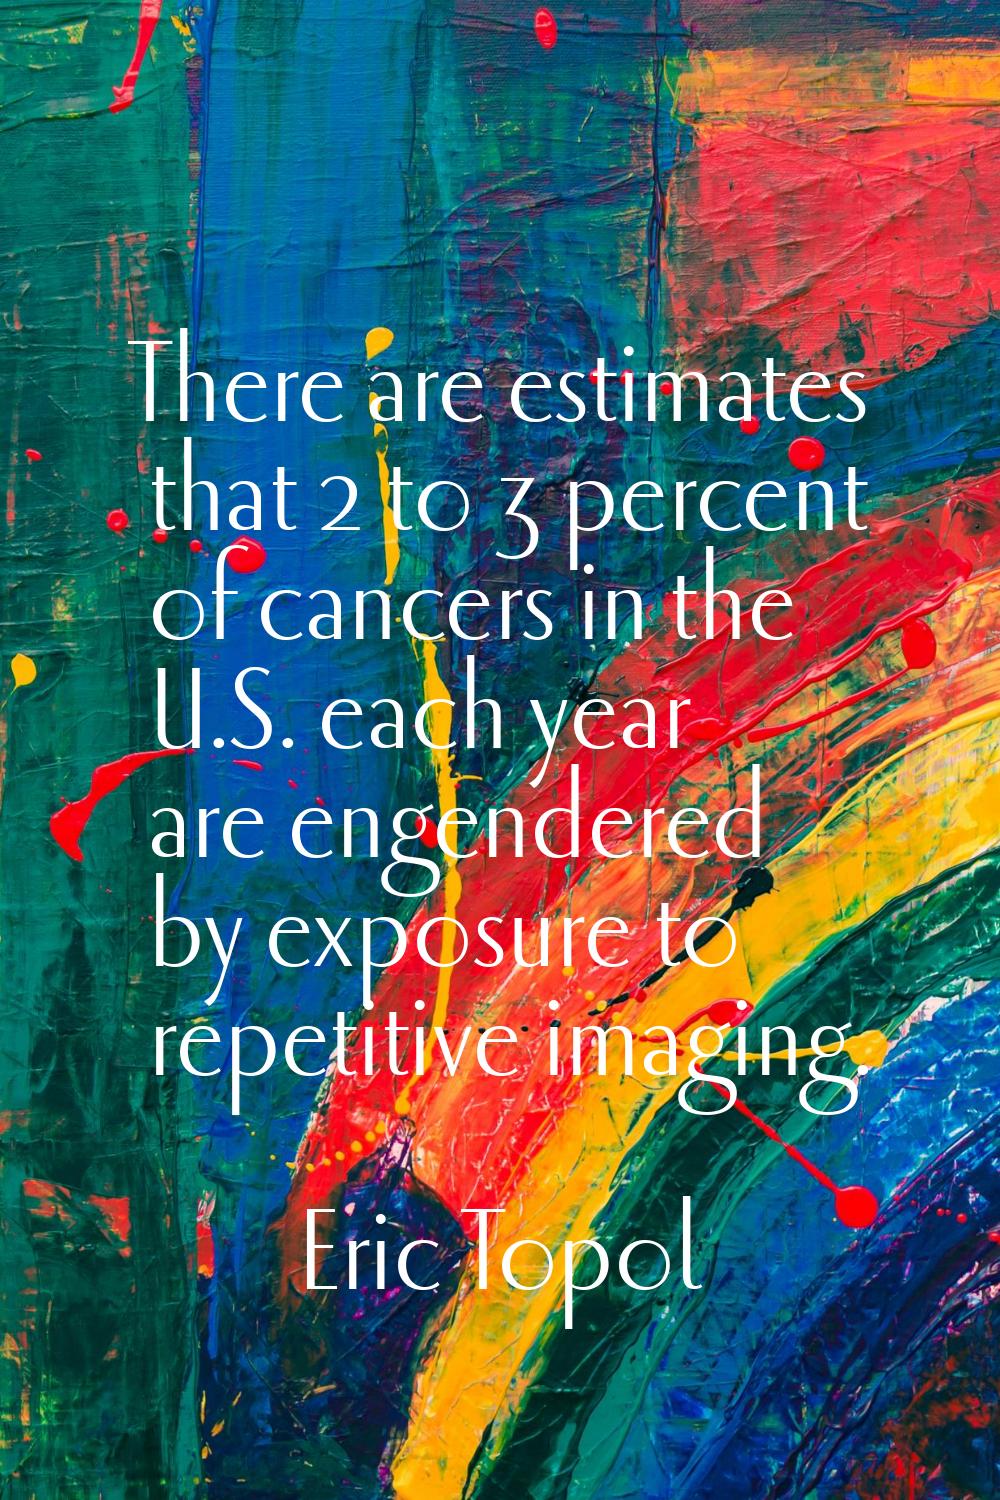 There are estimates that 2 to 3 percent of cancers in the U.S. each year are engendered by exposure